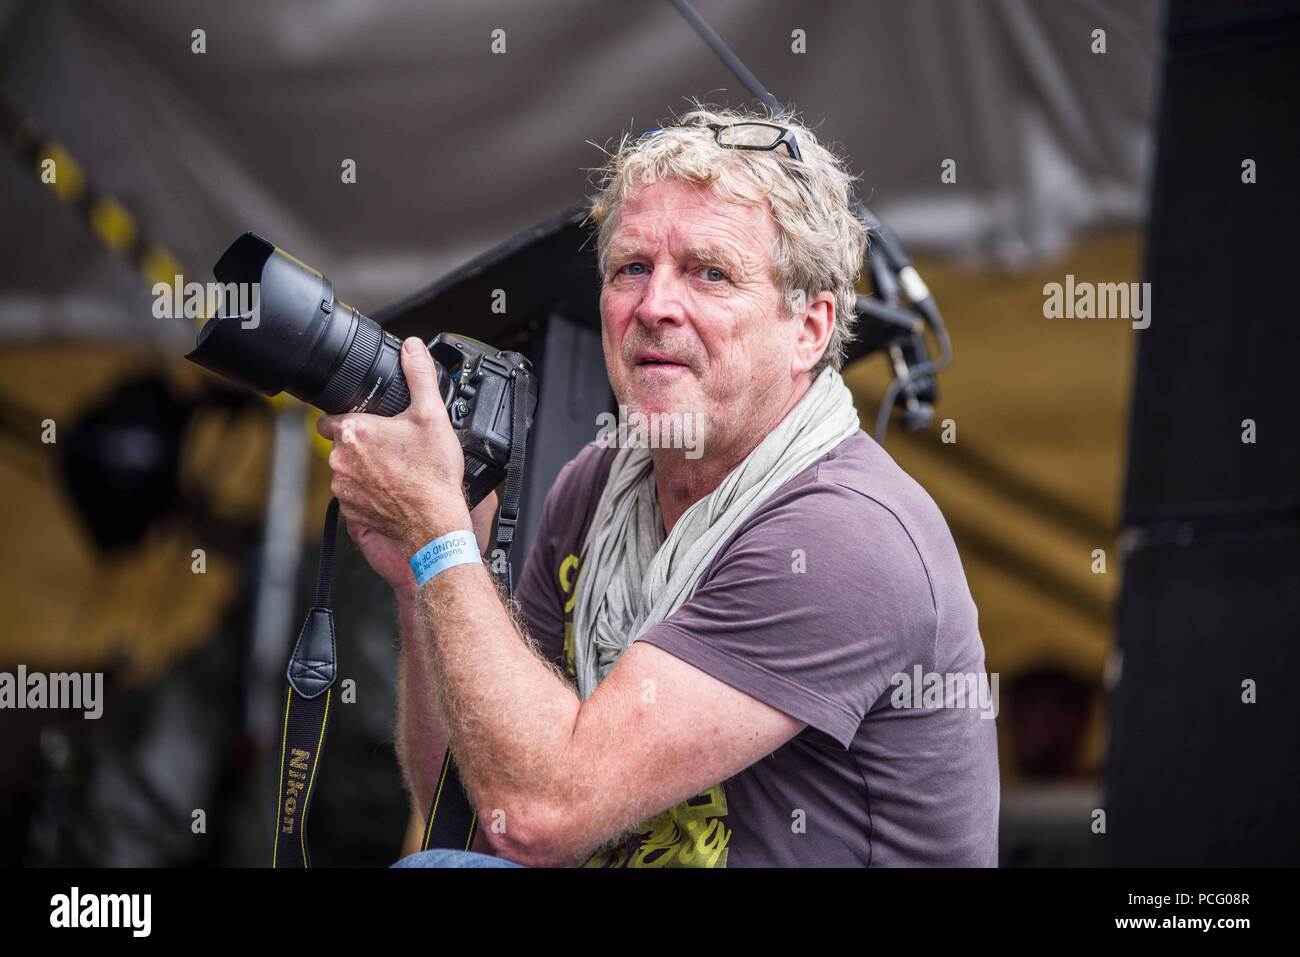 Munich, Bavaria, Germany. 22nd July, 2018. Photographer Hans Juergen Staudt, also known as HaJÃ¼ Staudt (HaJu Staudt) of Munich just a few days before his death. Staudt was a photographer with the United Nations Framework Convention on Climate Change (UNFCCC) Credit: Sachelle Babbar/ZUMA Wire/Alamy Live News Stock Photo